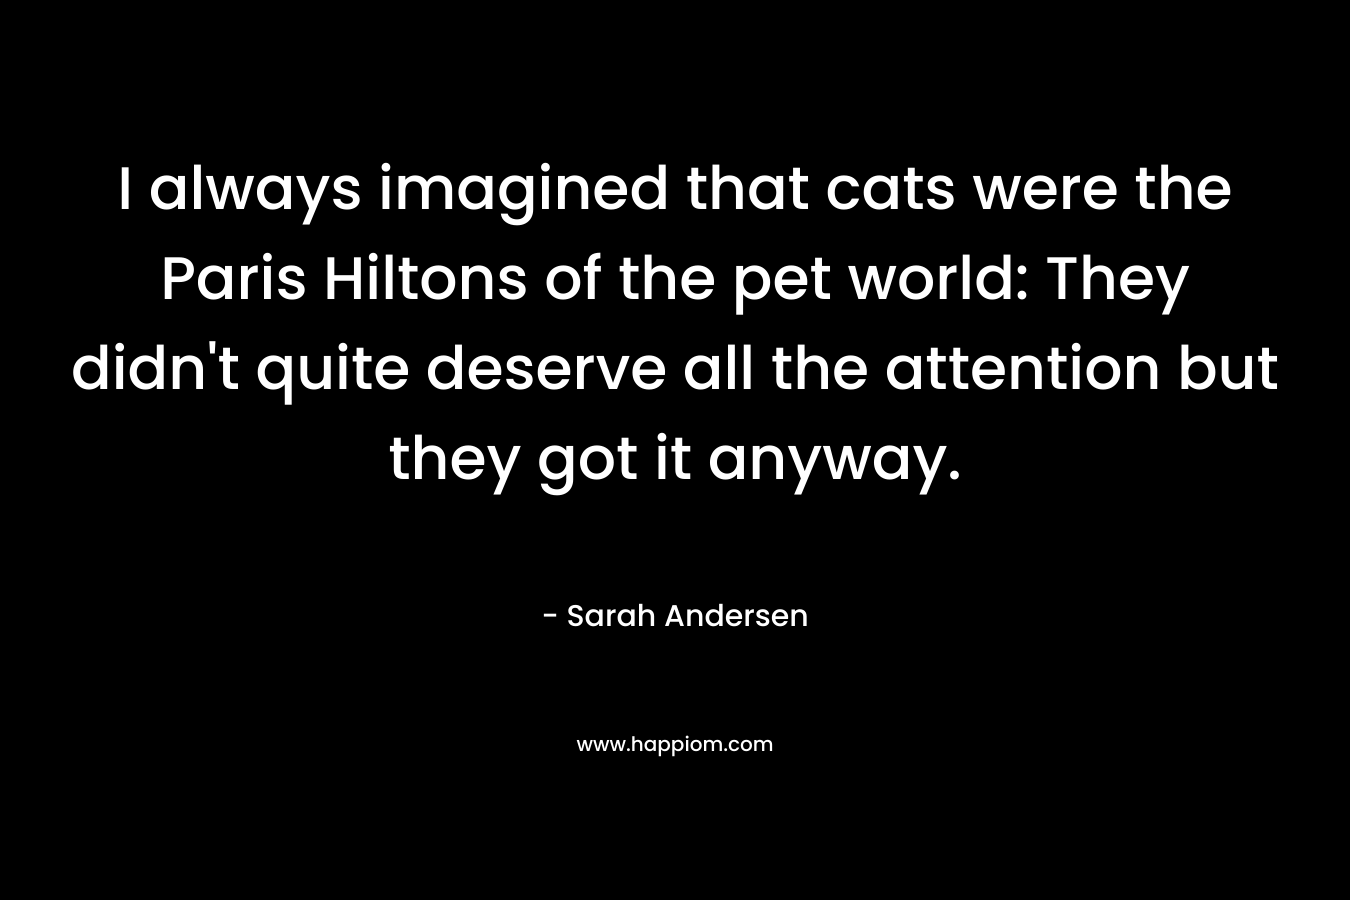 I always imagined that cats were the Paris Hiltons of the pet world: They didn’t quite deserve all the attention but they got it anyway. – Sarah Andersen